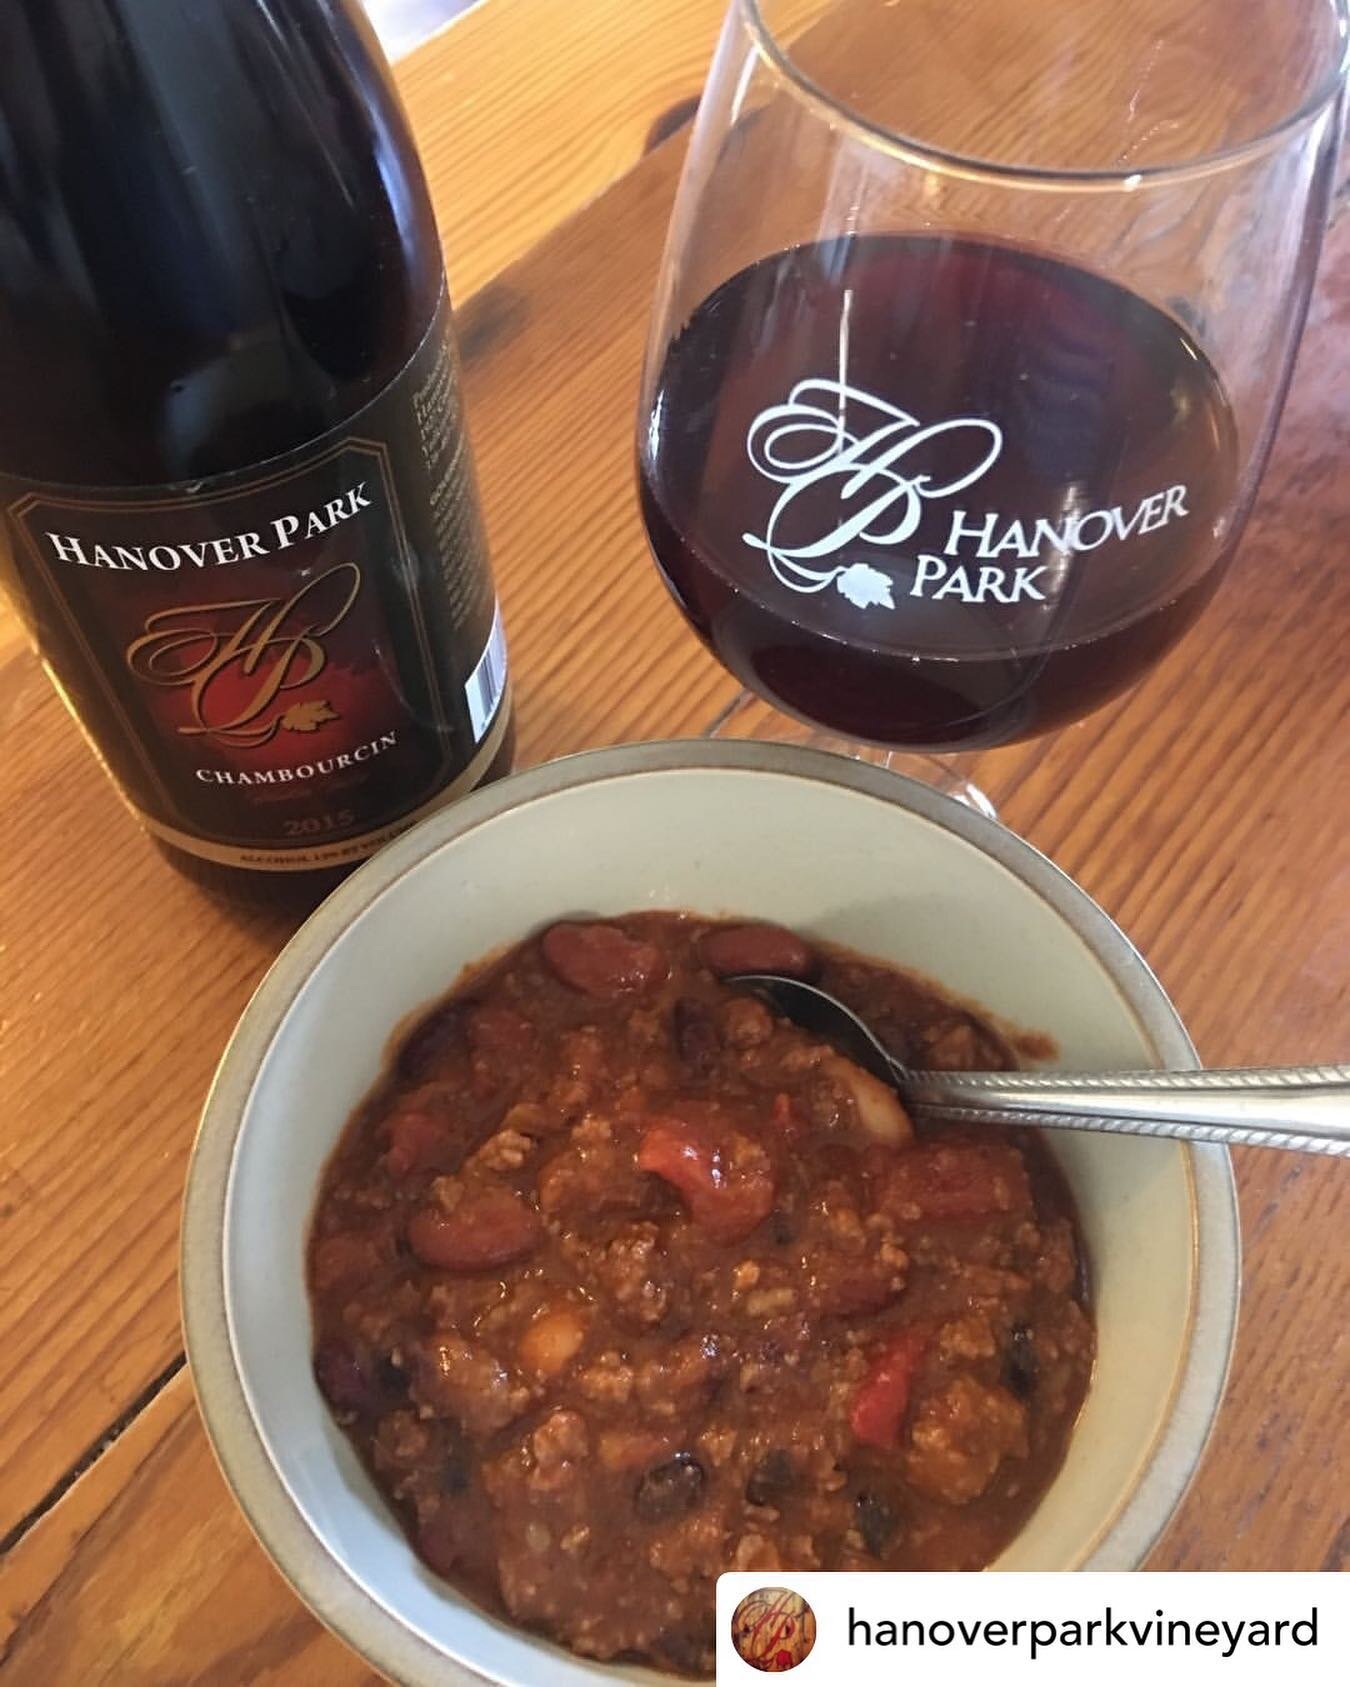 Posted @withregram &bull; @hanoverparkvineyard Please join us for our annual Chambourcin and Chili Day on Sunday, March 17th from 1-4pm. Come and enjoy a glass of our Chambourcin along with a bowl of Chili on the side for $15. Our friends Jayce and J